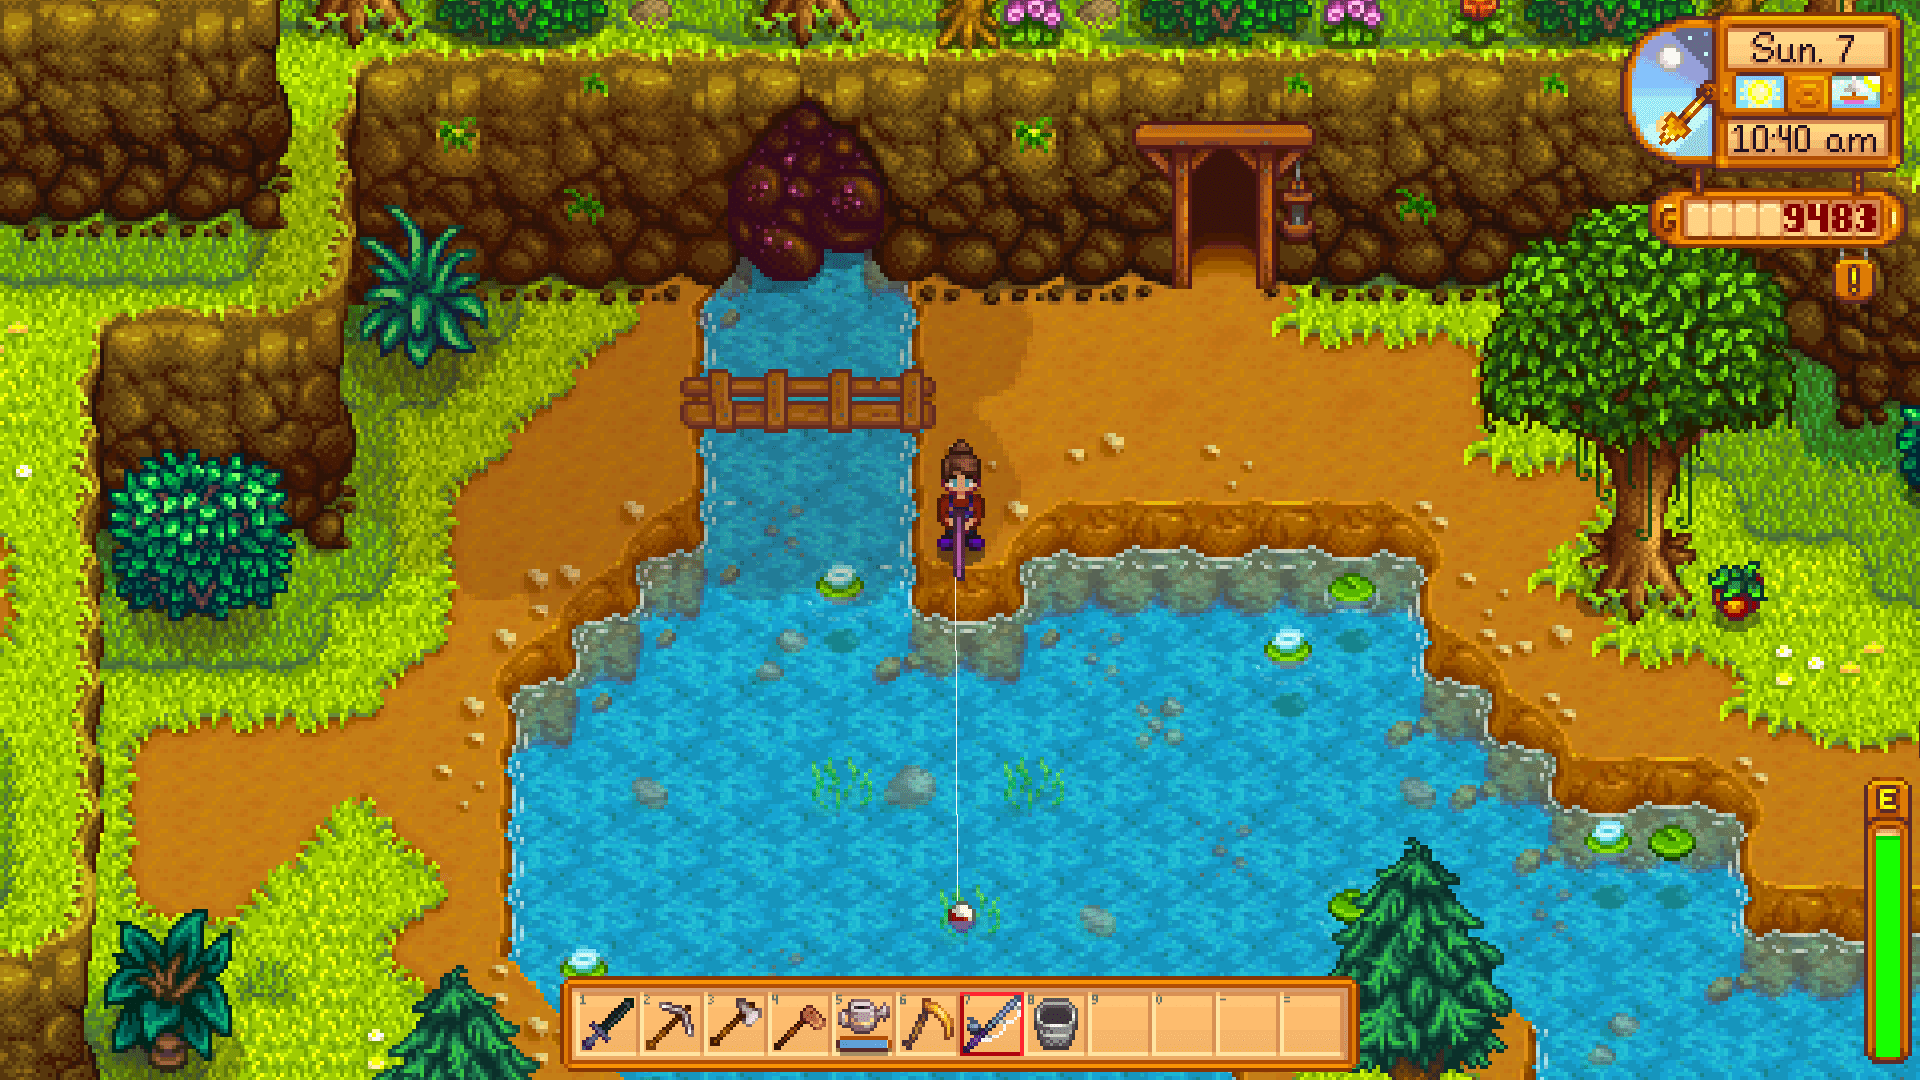 Screenshot of Stardew Valley. The player character fishes from just below the mines in the Mountain Lake.